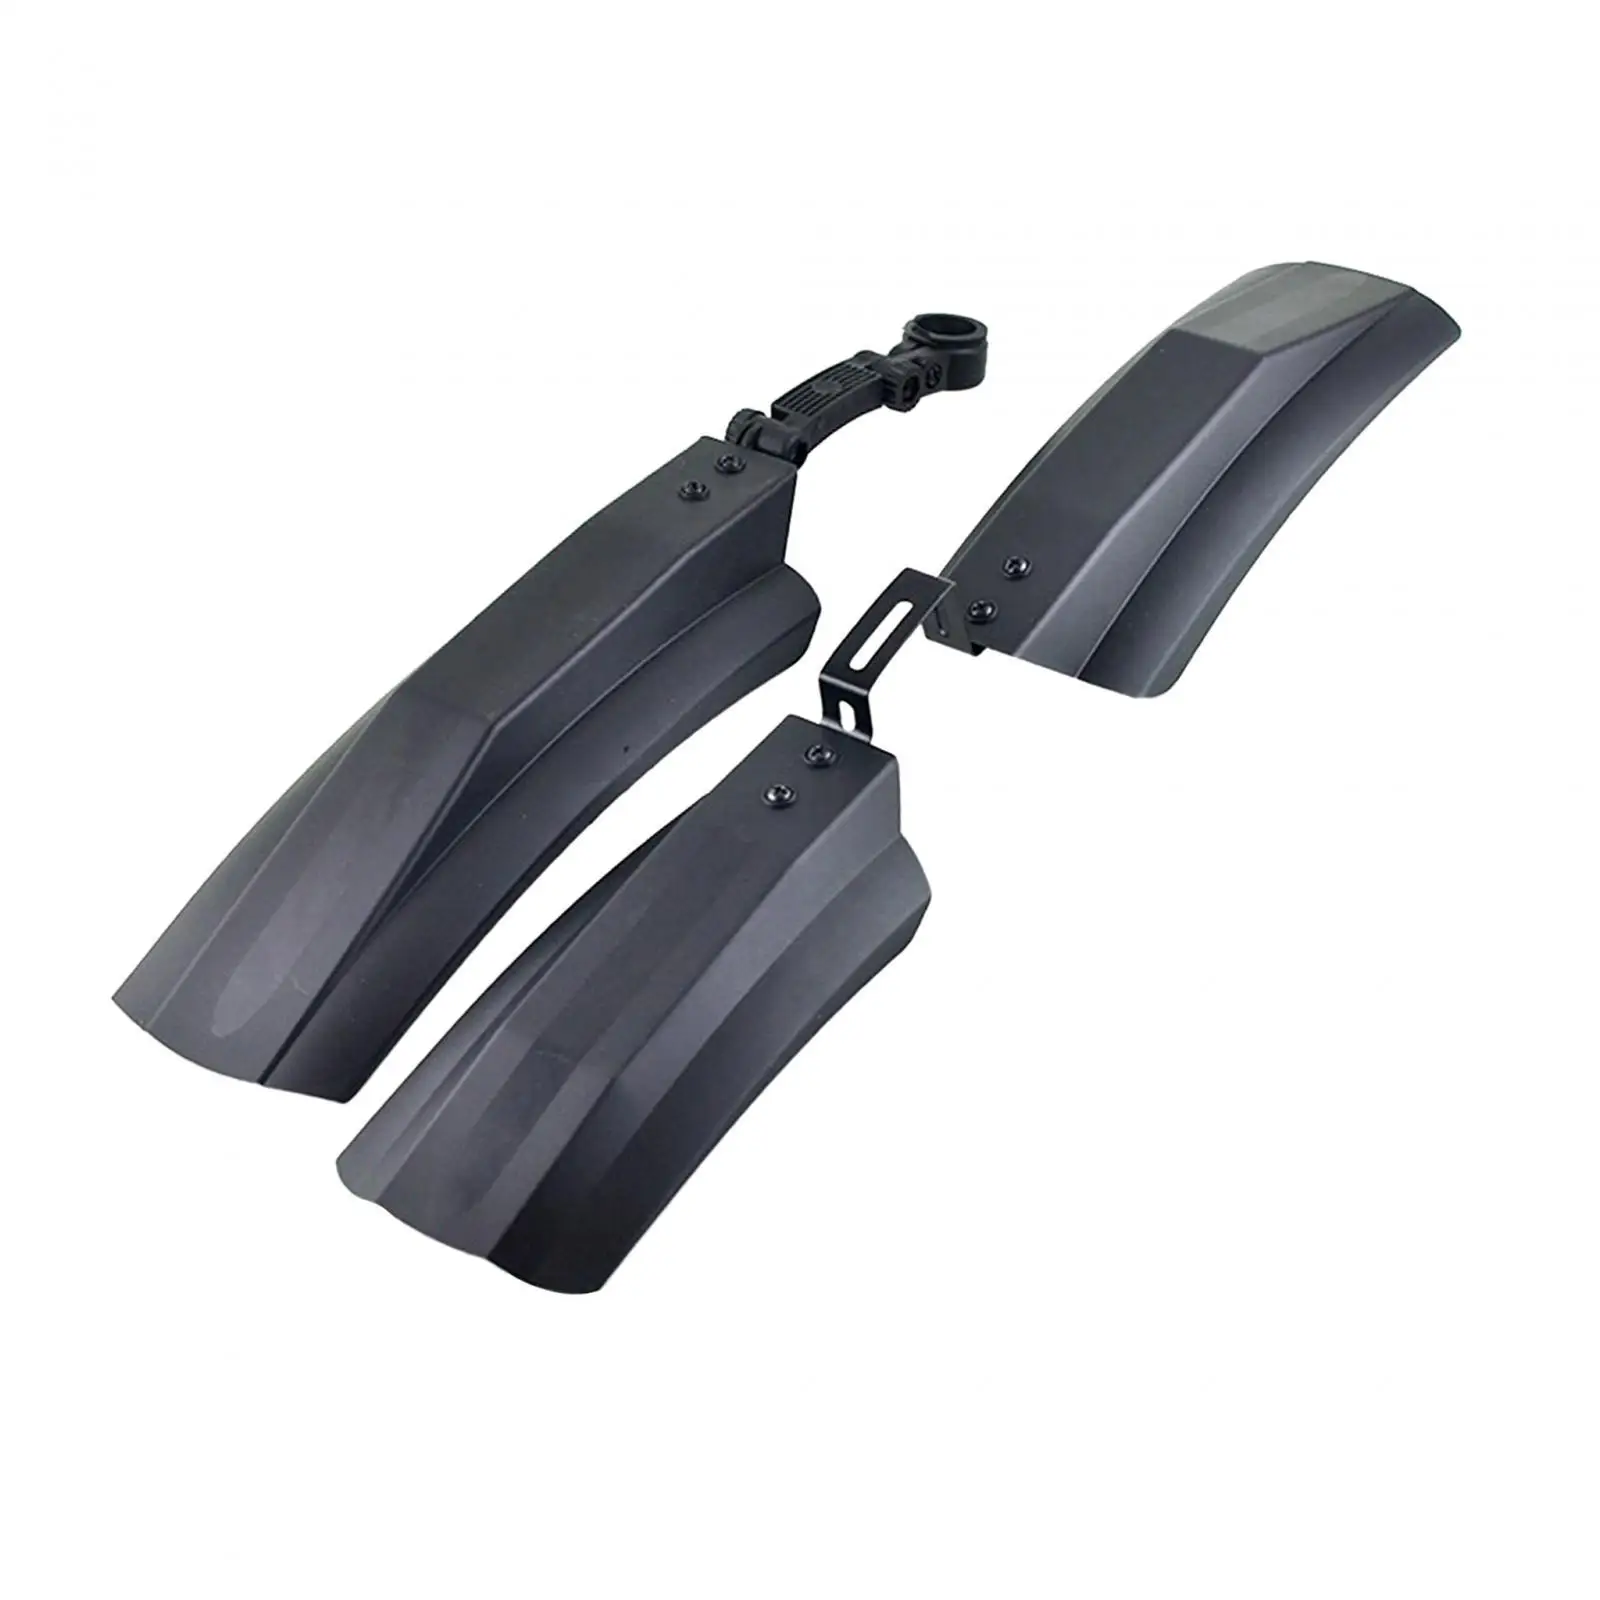 Bike Fenders Front and Rear Lengthen Widen Black Bicycle Tire Mudguard for Mountain Bikes Bike Traveling Snow Bikes Riding